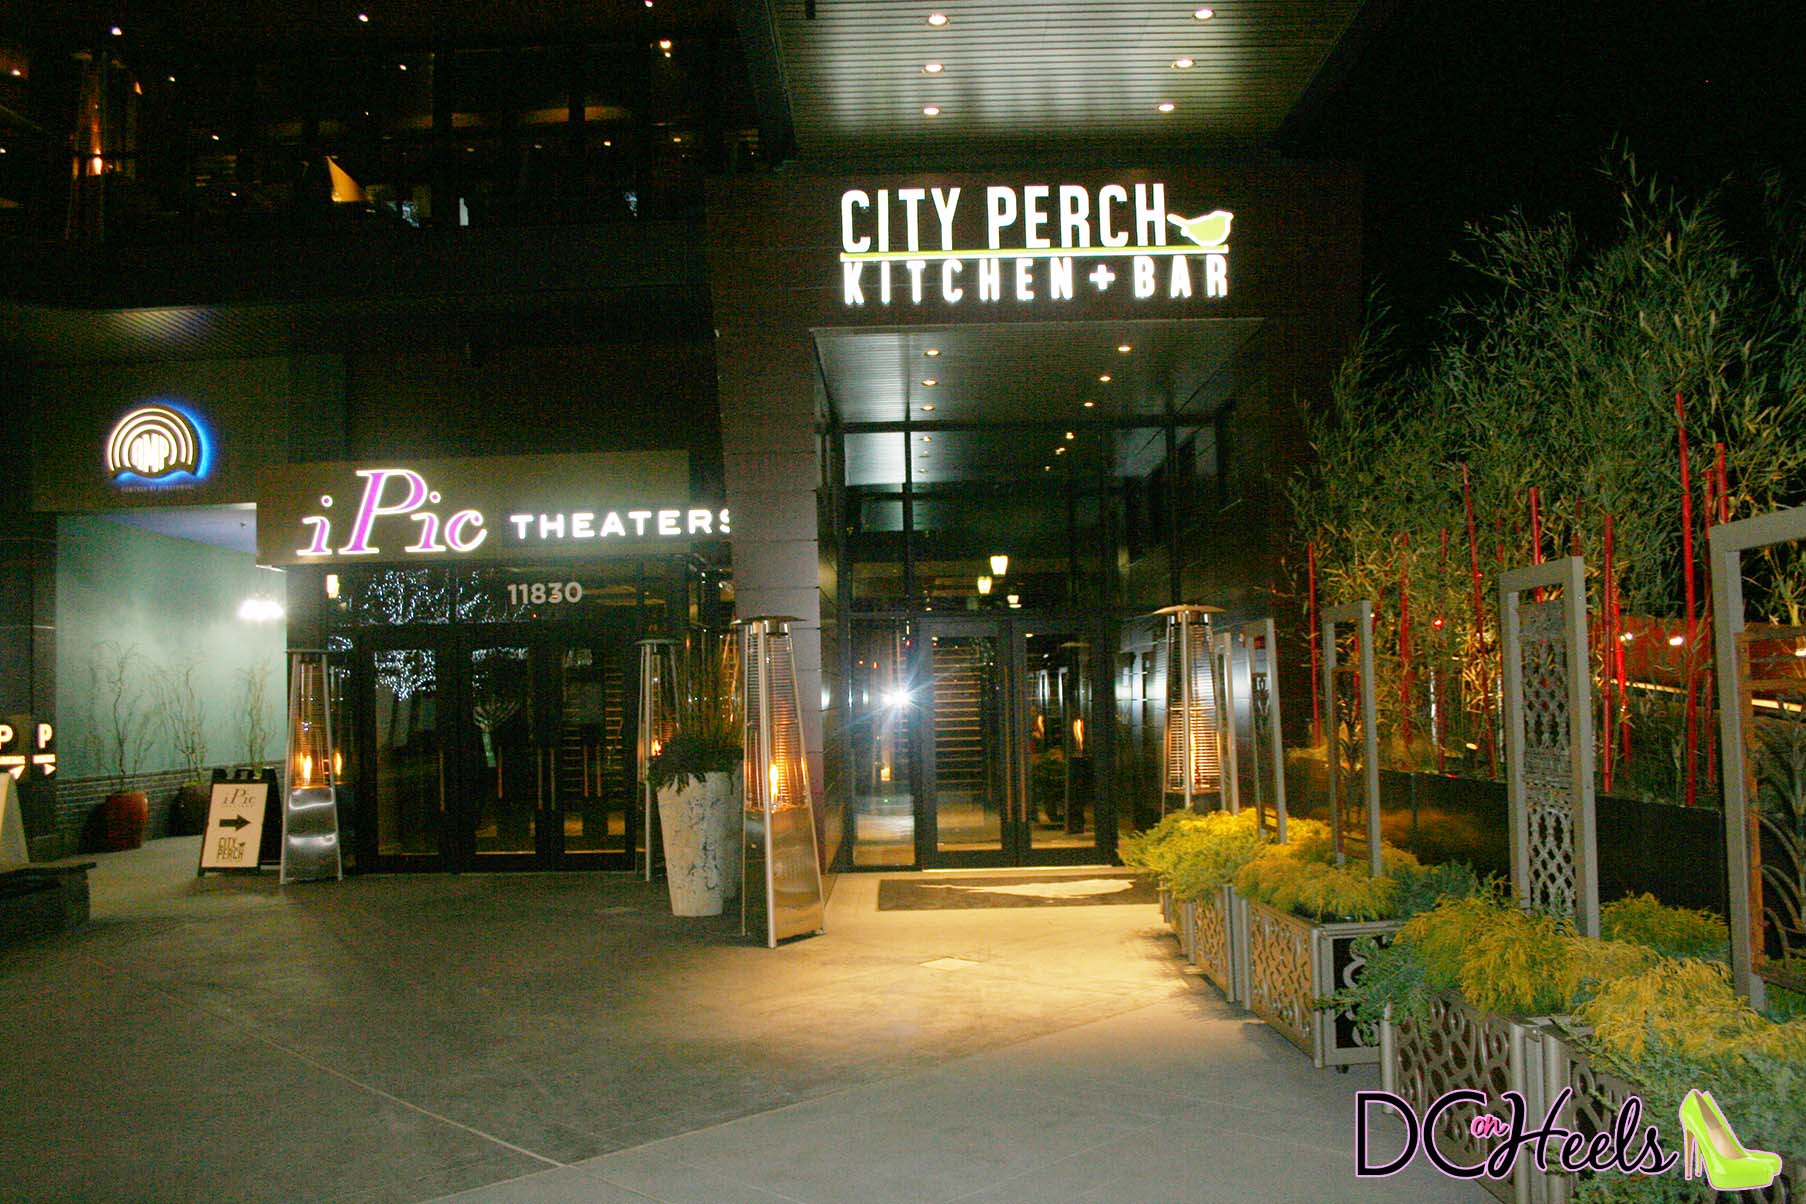 City Perch Kitchen + Bar opened last Thursday at the iPic Theaters in the new Pike & Rose development in North Bethesda. (Photo: Mark Heckathorn/DC on Heels)